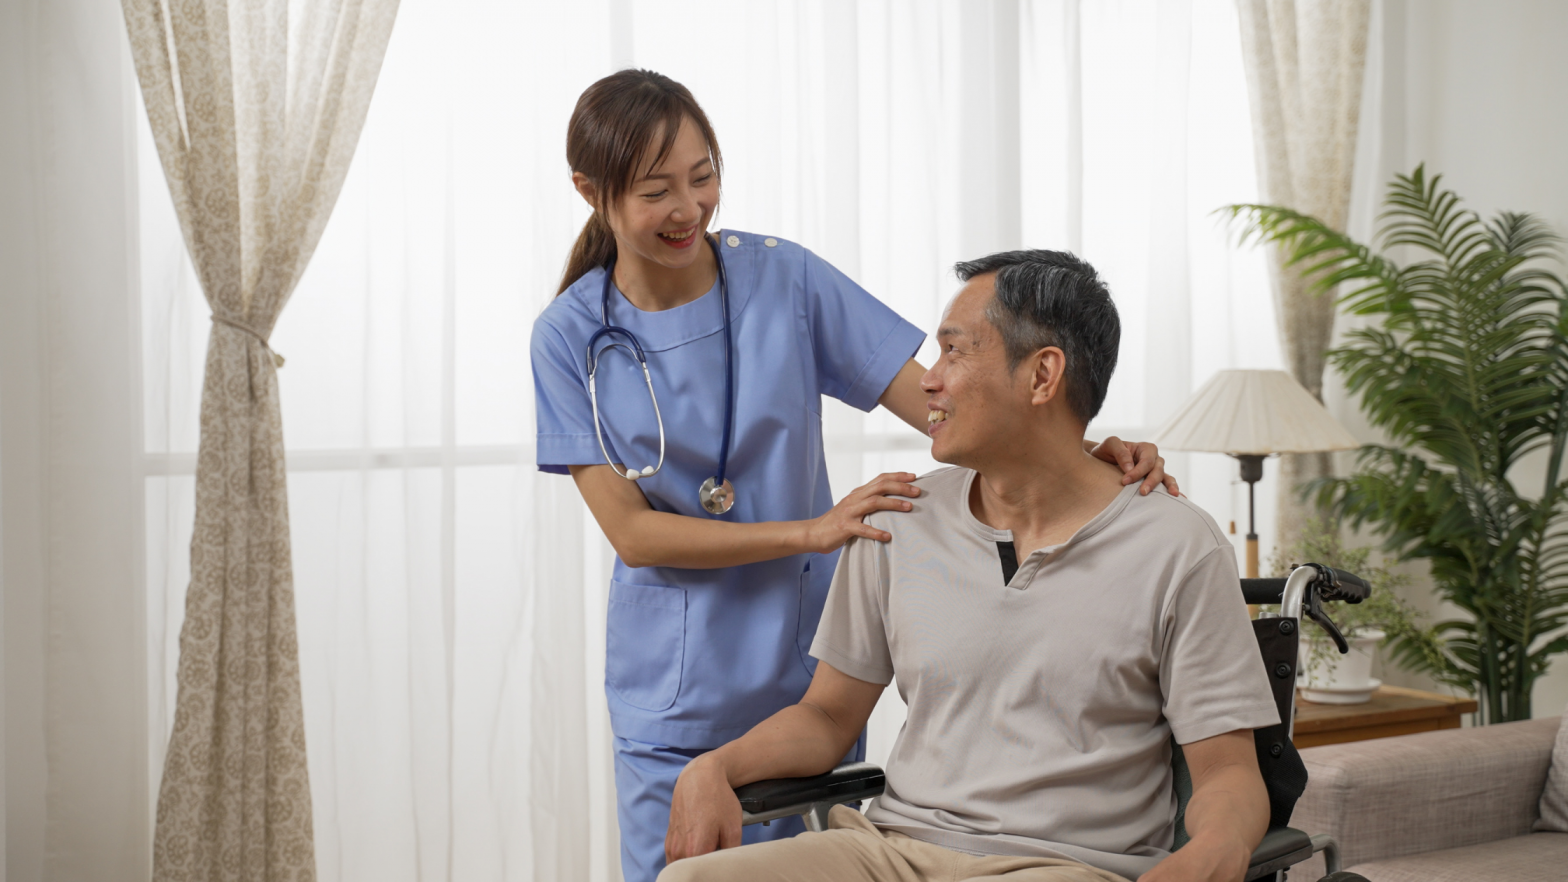 The Home Health Aide Staffing Shortage: A Crisis Impacting Our Elderly Population